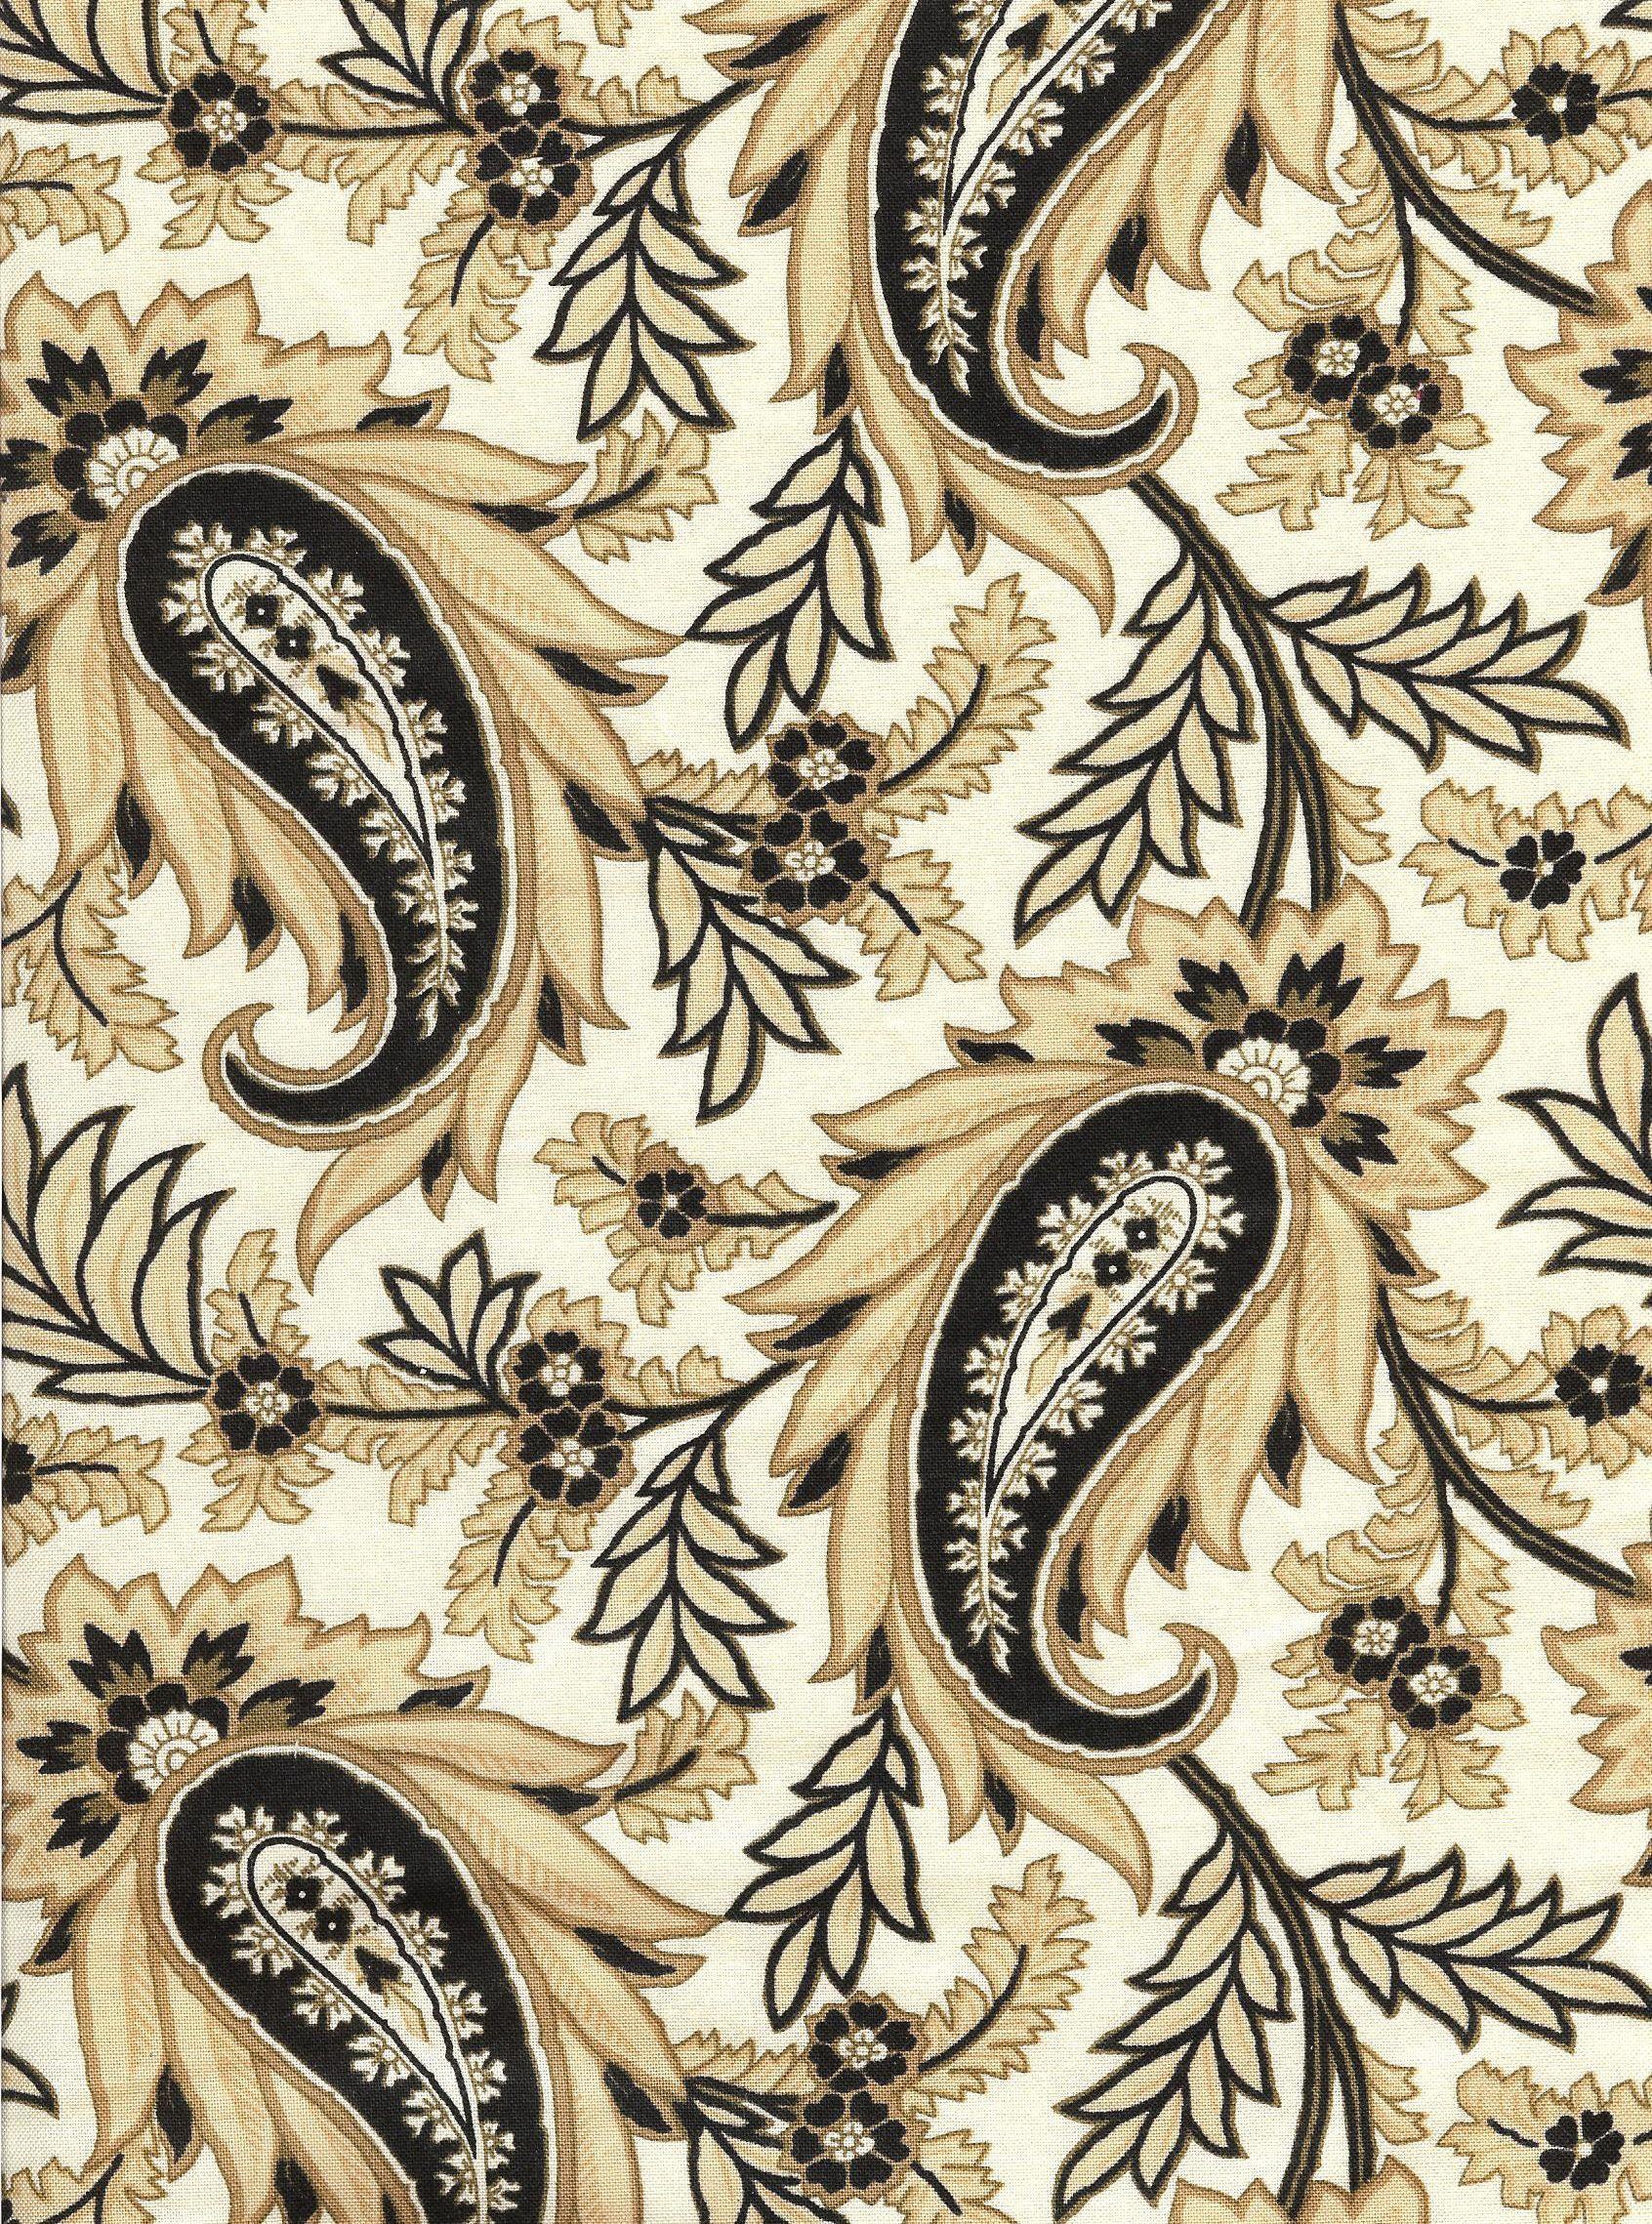 Western Theme Fabric Wallpaper and Home Decor  Spoonflower